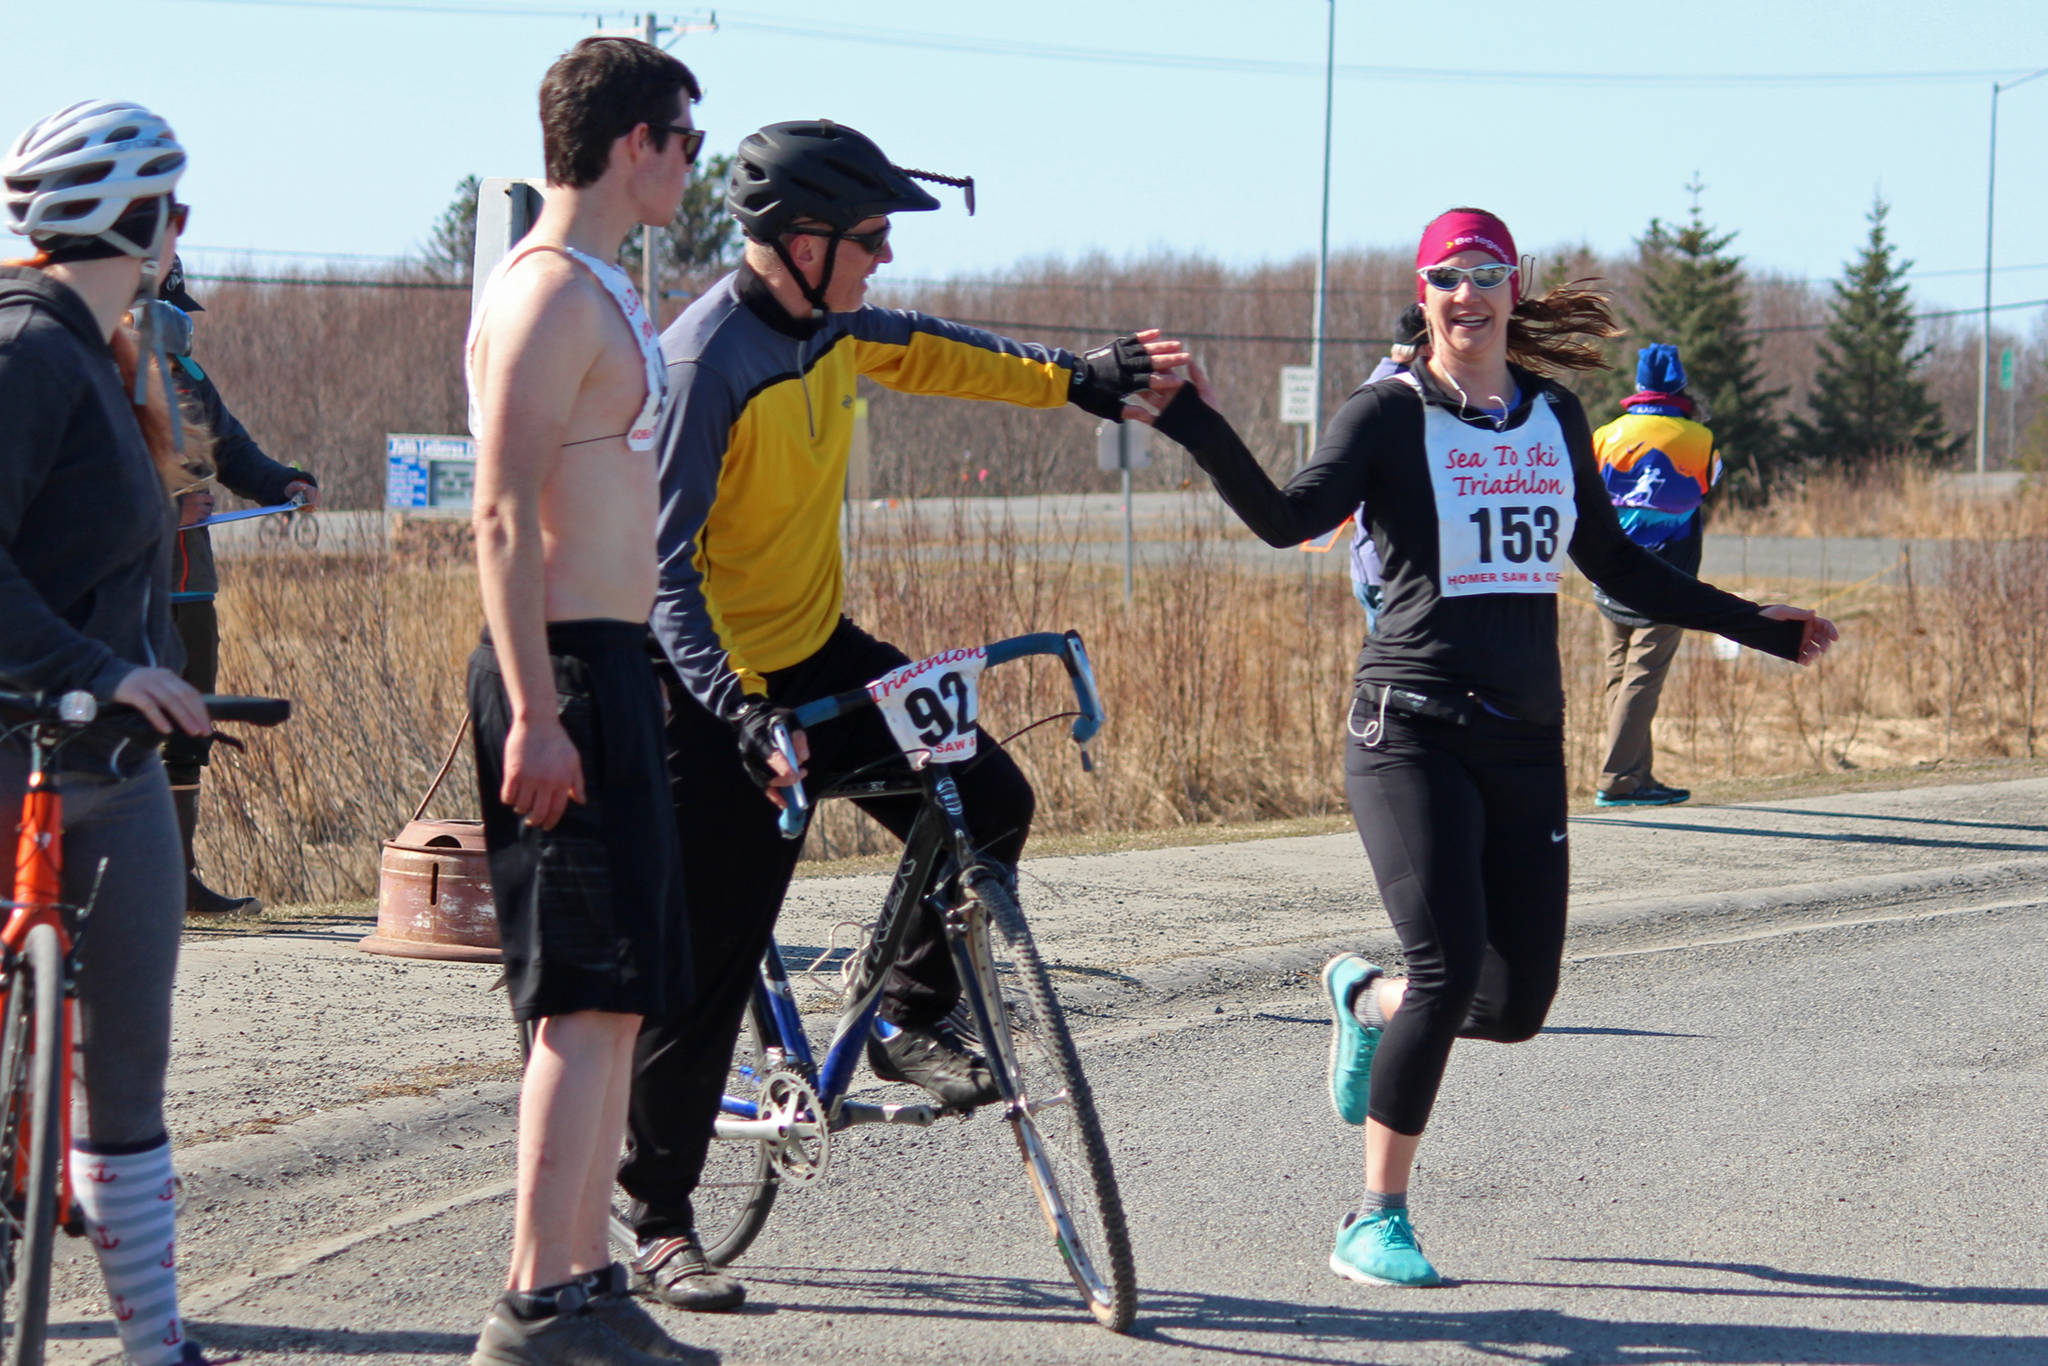 A runner tags her teammate after the first leg of the Sea to Ski Triathlon on Sunday, March 31, 2019 in Homer, Alaska. (Photo by Megan Pacer/Homer News)